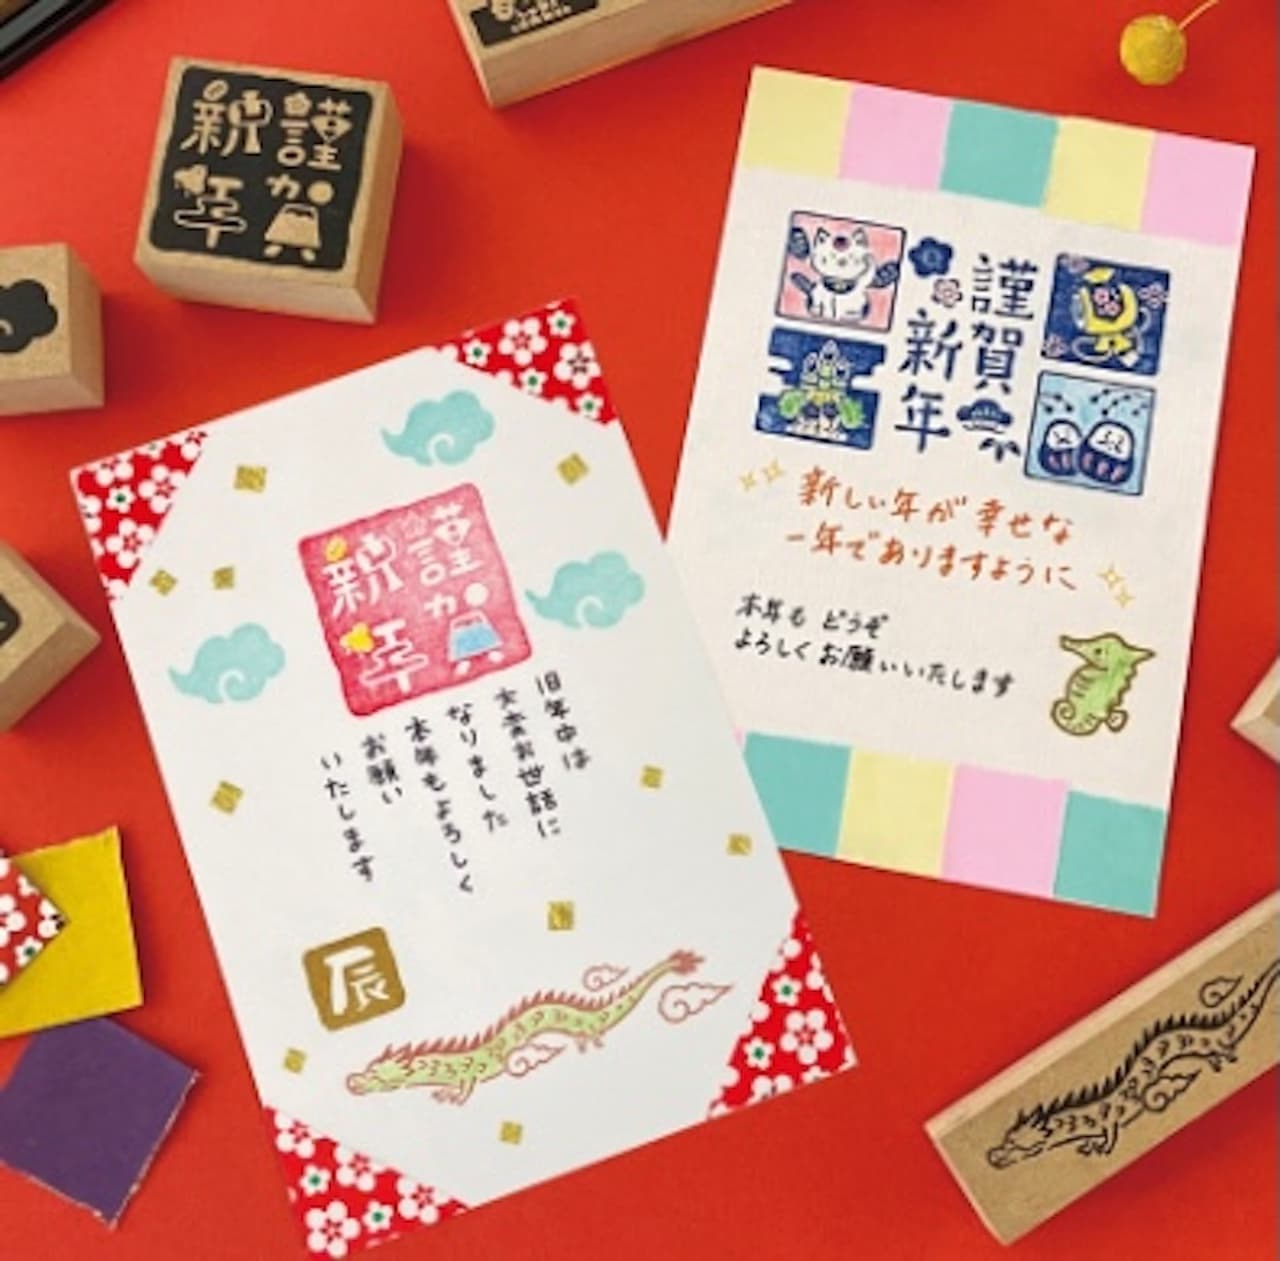 Daiso "New Year's greeting stamp" (Japanese only)